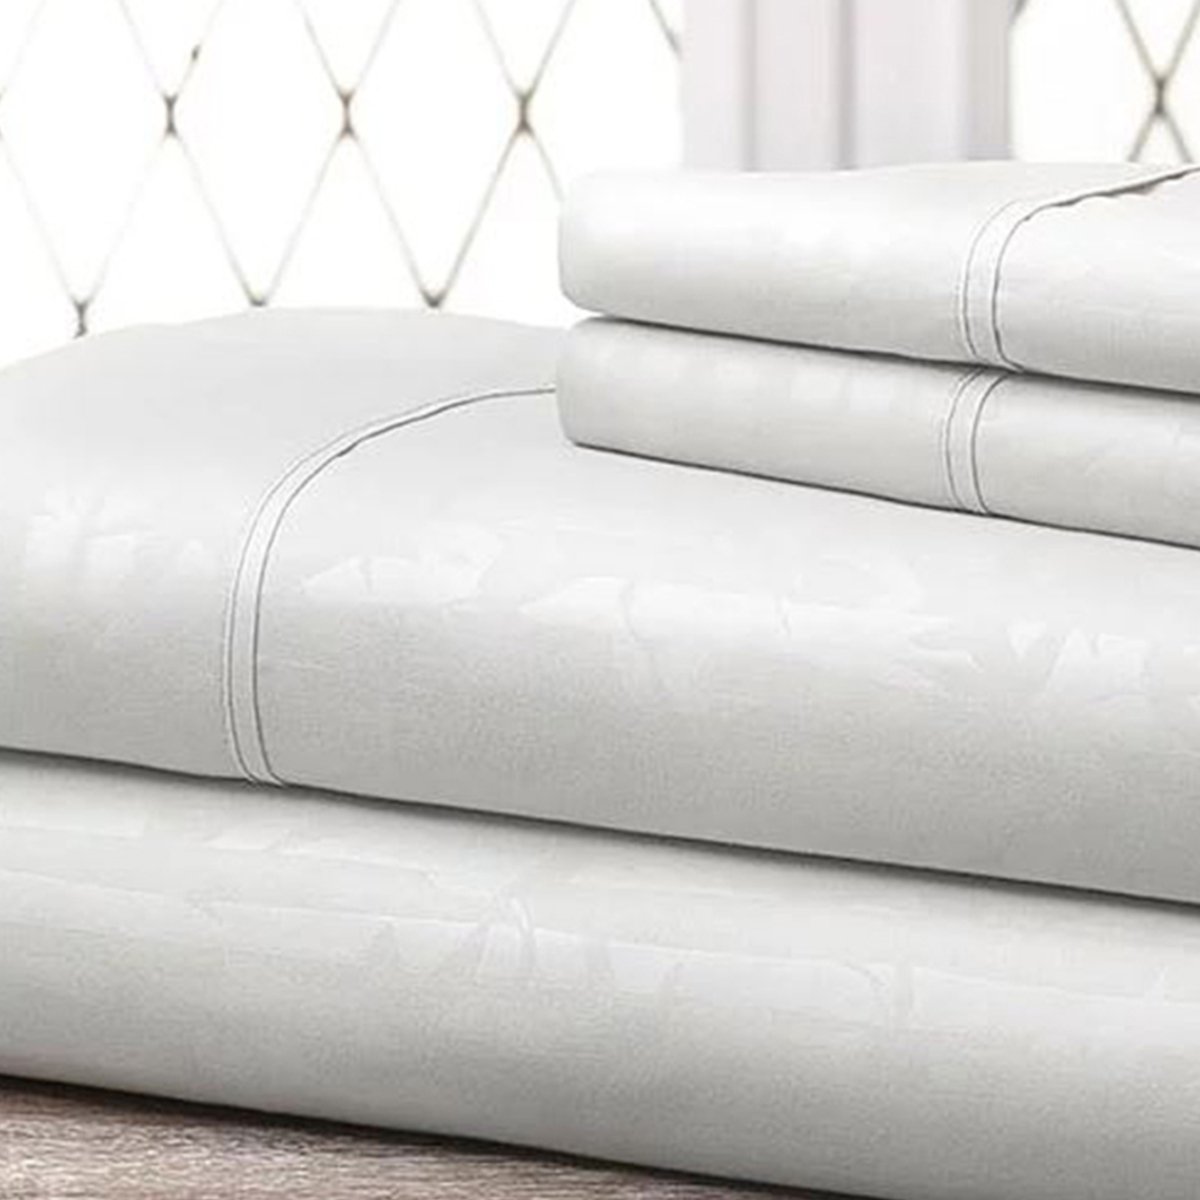 Super-soft 1600 Series Bamboo Embossed Bed Sheet, White - King, 4 Piece